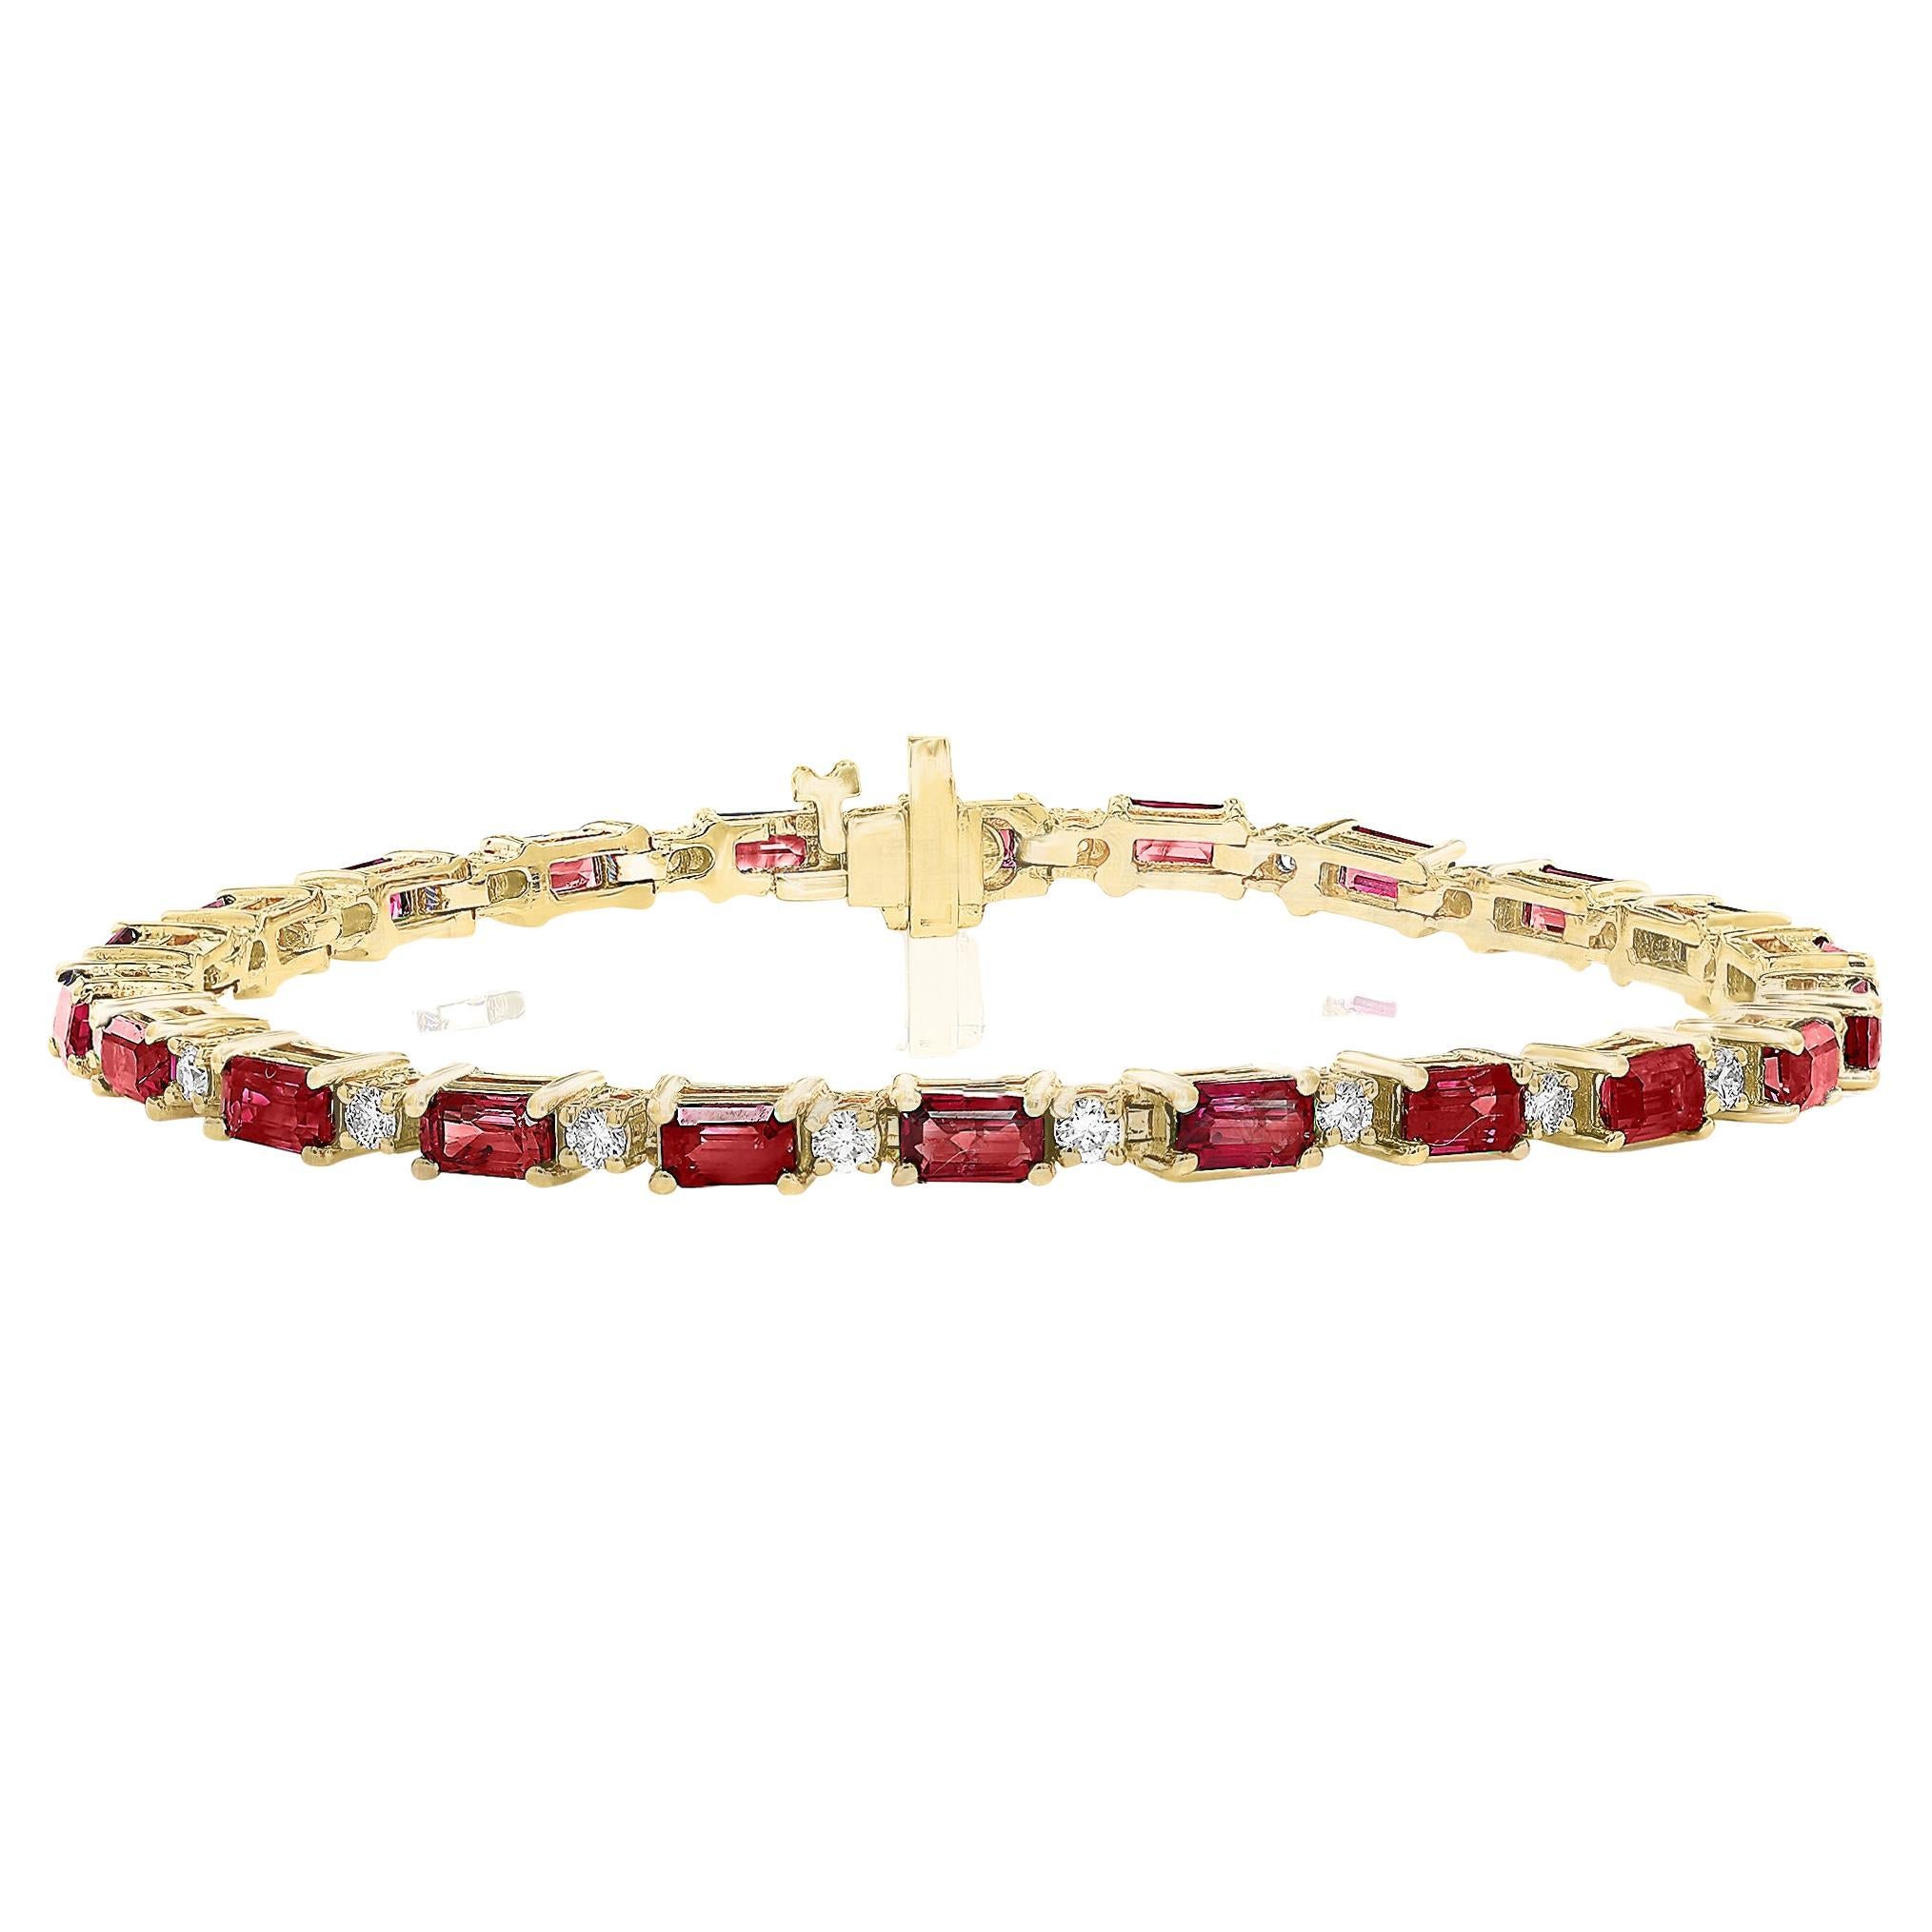 6.12 Carat Emerald Cut Ruby and Diamond Bracelet in 14K Yellow Gold For Sale